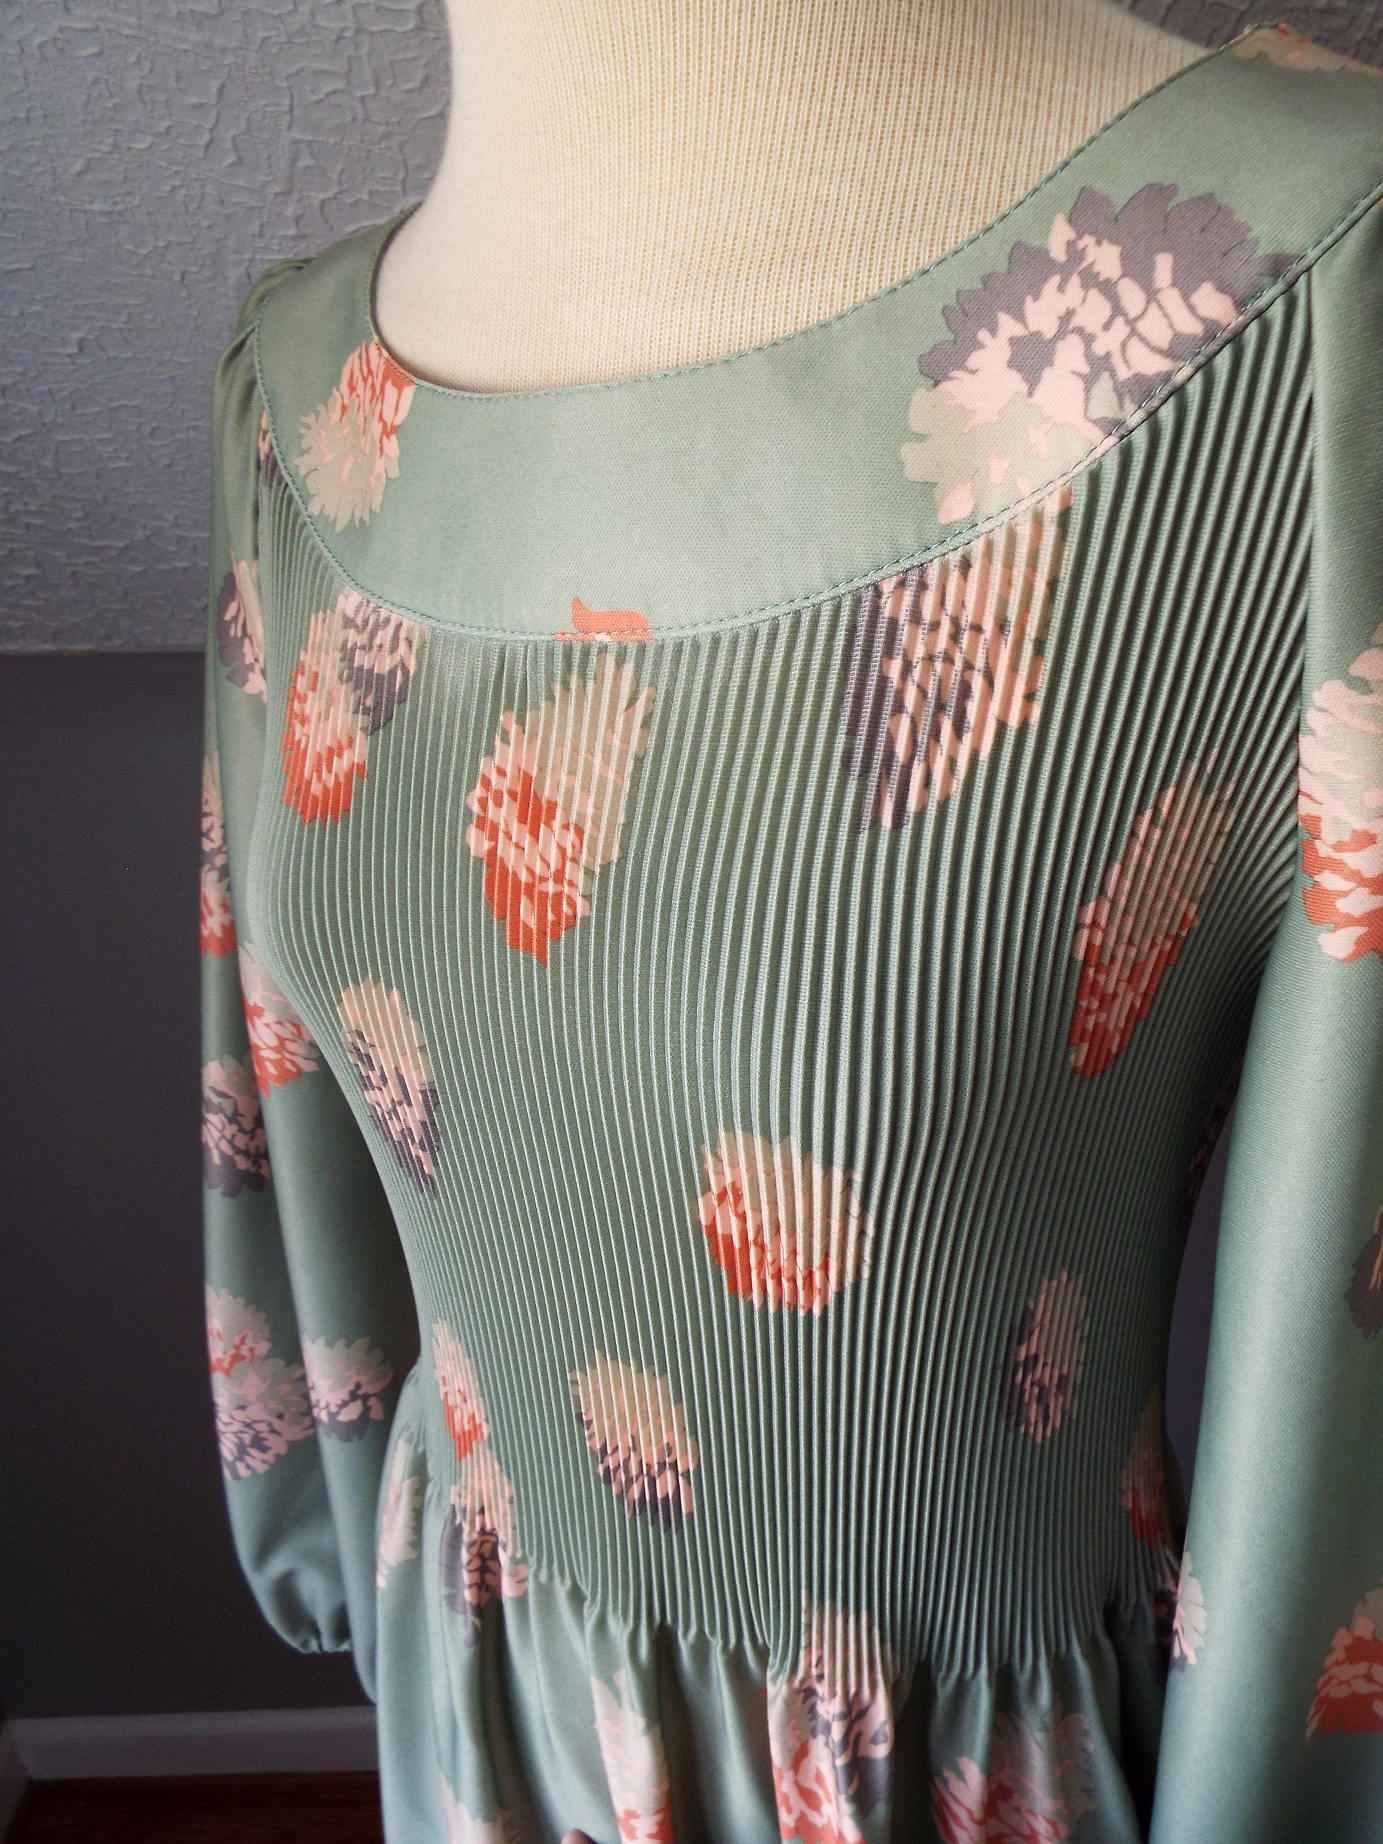 Vintage Long Sleeve Green Floral Print Dress by Andrea Gayle